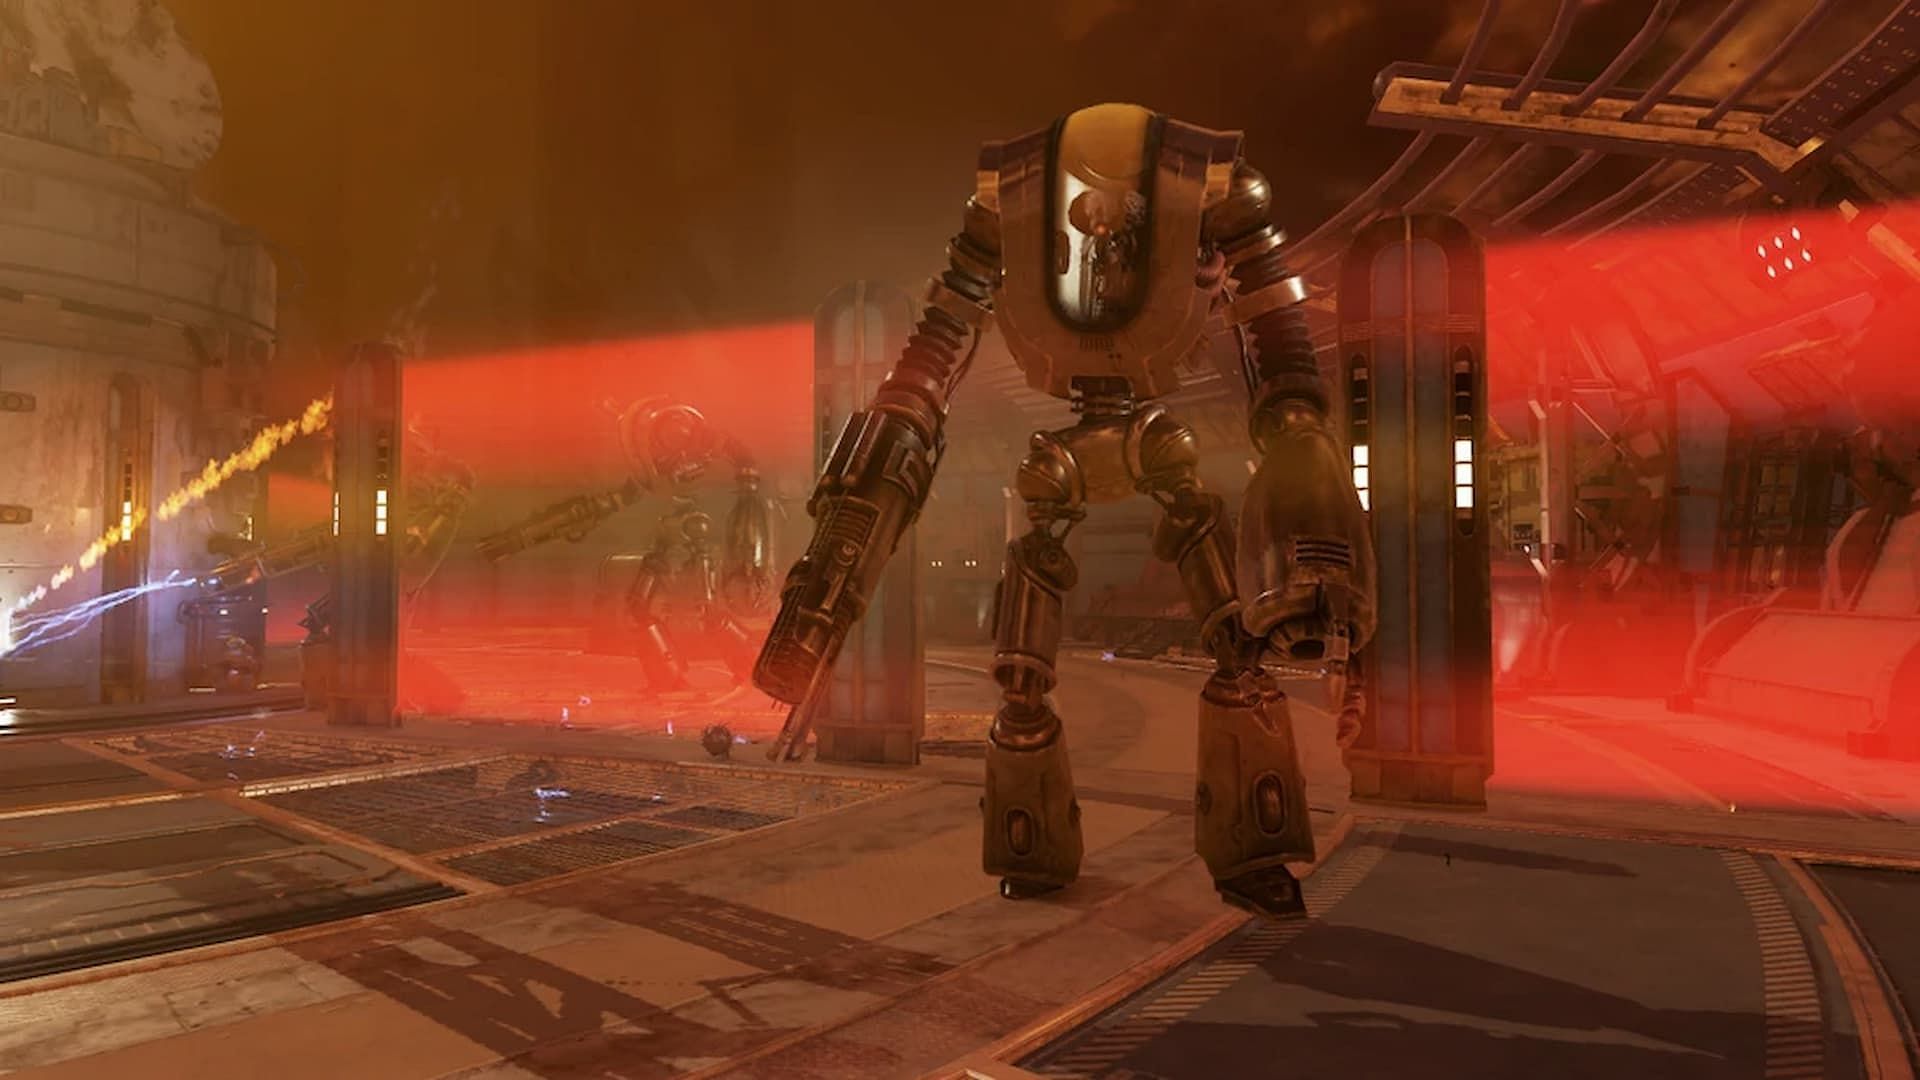 The Storm Goliaths boss fight in Skyline Valley (Image via Bethesda Softworks)